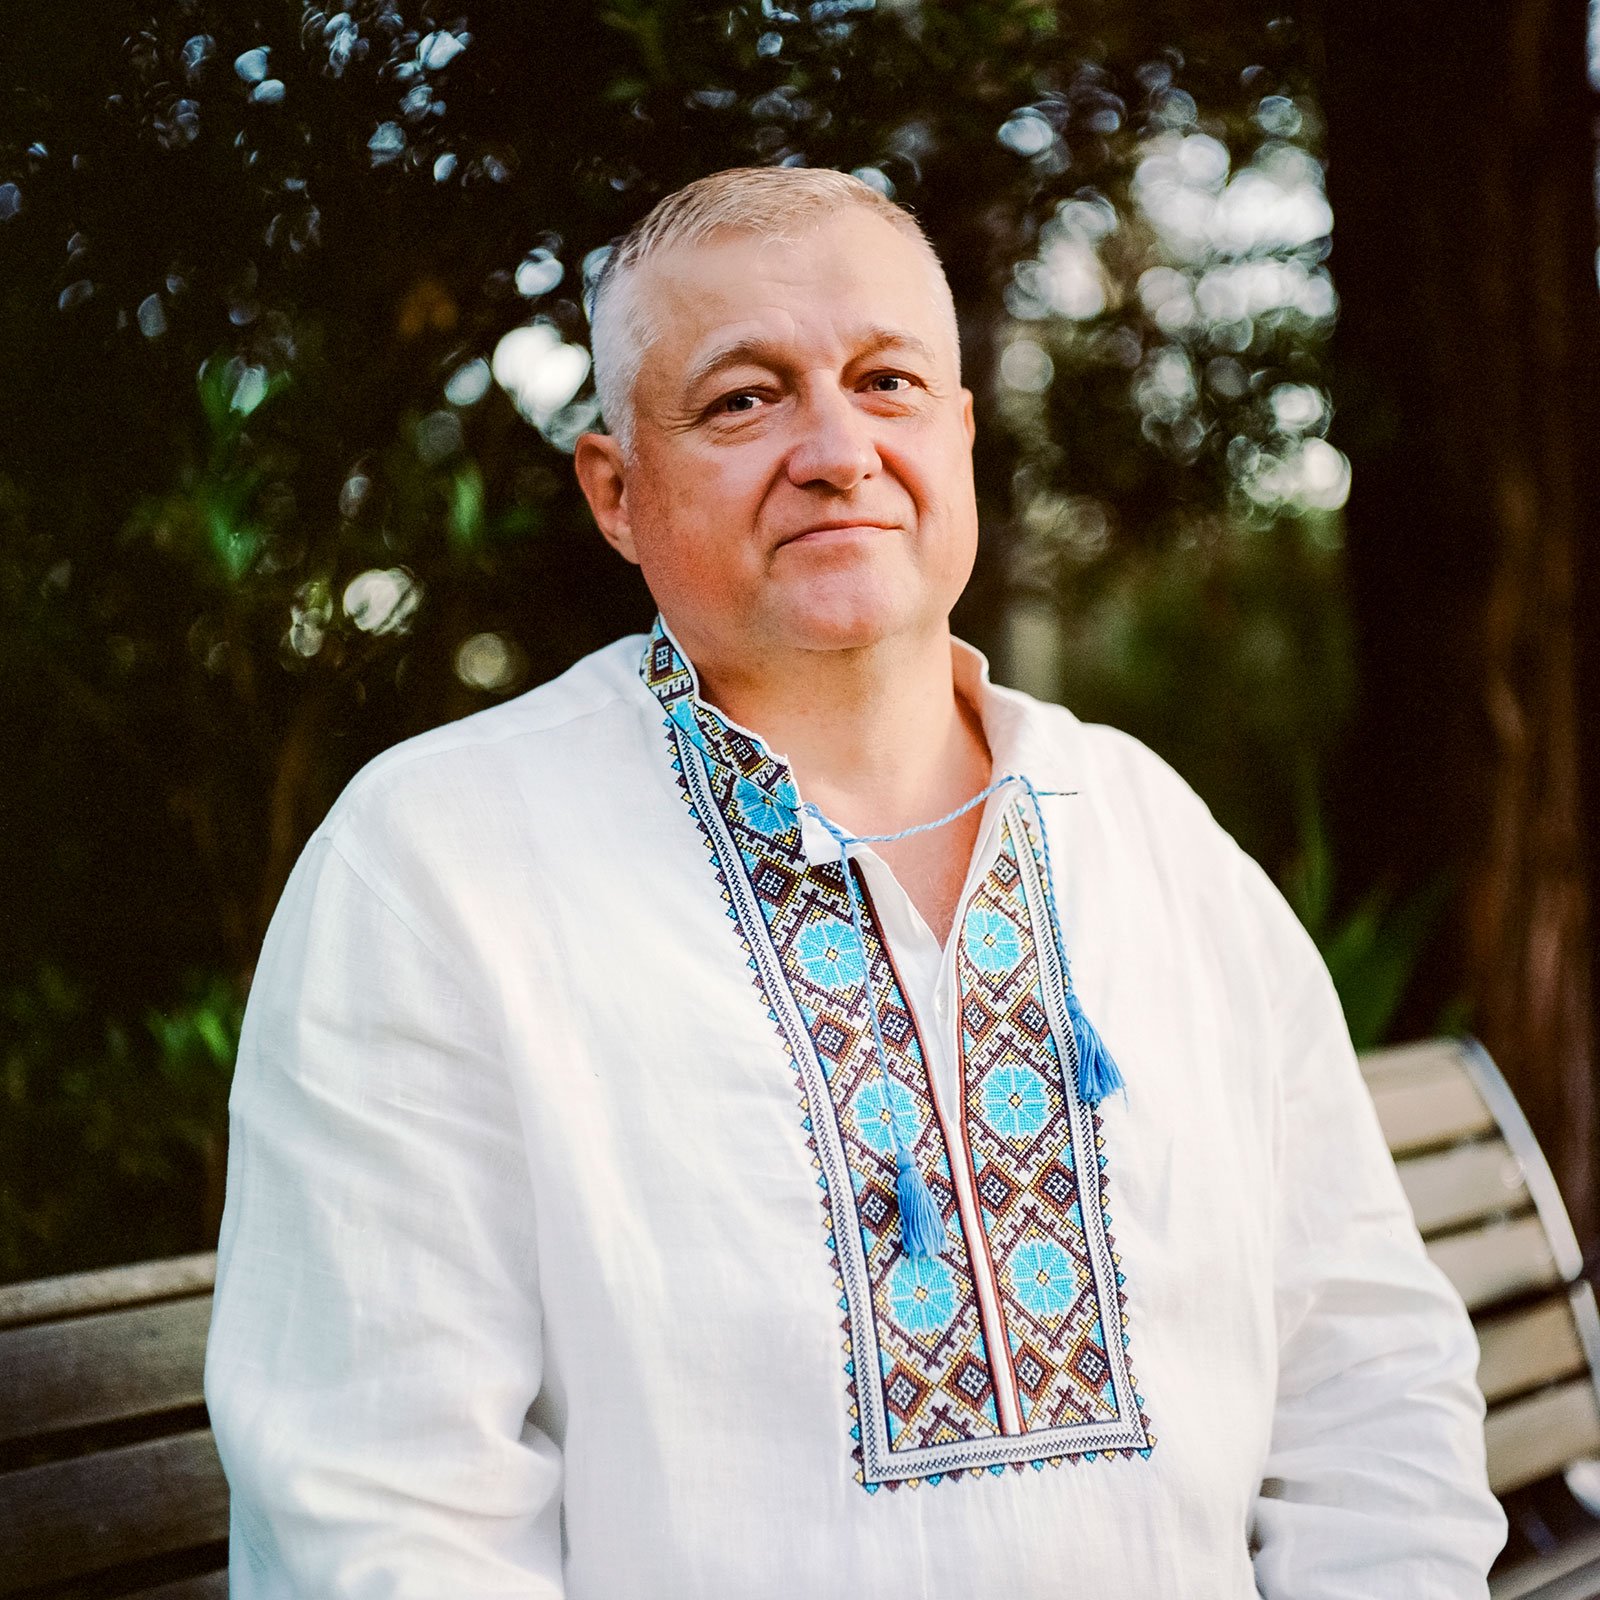 Older Ukrainian in traditional white and blue outfit